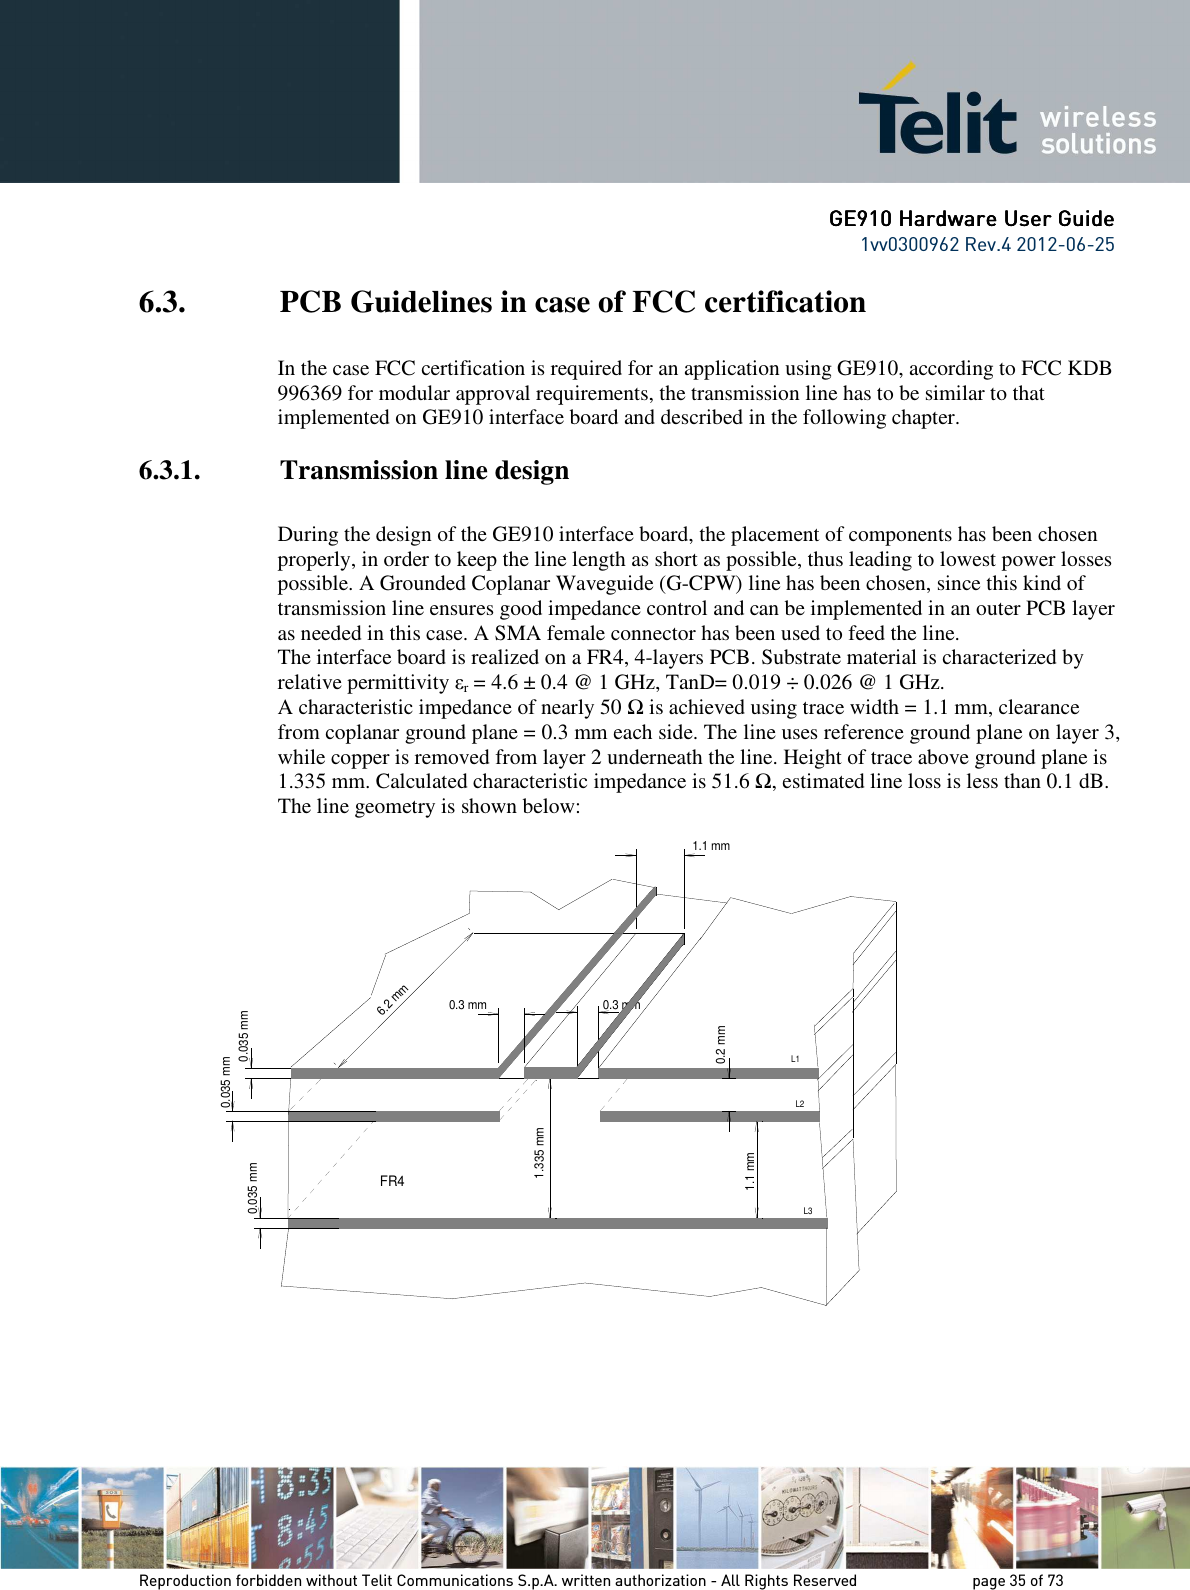      GE9GE9GE9GE910 Hardware User Guide10 Hardware User Guide10 Hardware User Guide10 Hardware User Guide    1vv0300962 Rev.4 2012-06-25    Reproduction forbidden without Telit Communications S.p.A. written authorization - All Rights Reserved    page 35 of 73 Mod. 0805 2011-07 Rev.2 6.3. PCB Guidelines in case of FCC certification  In the case FCC certification is required for an application using GE910, according to FCC KDB 996369 for modular approval requirements, the transmission line has to be similar to that implemented on GE910 interface board and described in the following chapter. 6.3.1. Transmission line design  During the design of the GE910 interface board, the placement of components has been chosen properly, in order to keep the line length as short as possible, thus leading to lowest power losses possible. A Grounded Coplanar Waveguide (G-CPW) line has been chosen, since this kind of transmission line ensures good impedance control and can be implemented in an outer PCB layer as needed in this case. A SMA female connector has been used to feed the line. The interface board is realized on a FR4, 4-layers PCB. Substrate material is characterized by relative permittivity εr = 4.6 ± 0.4 @ 1 GHz, TanD= 0.019 ÷ 0.026 @ 1 GHz. A characteristic impedance of nearly 50 Ω is achieved using trace width = 1.1 mm, clearance from coplanar ground plane = 0.3 mm each side. The line uses reference ground plane on layer 3, while copper is removed from layer 2 underneath the line. Height of trace above ground plane is 1.335 mm. Calculated characteristic impedance is 51.6 Ω, estimated line loss is less than 0.1 dB. The line geometry is shown below:                   0.3 mm0.035 mm0.3 mm6.2 mmFR40.035 mm0.035 mm1.335 mm0.2 mm1.1 mmL3L2L11.1 mm